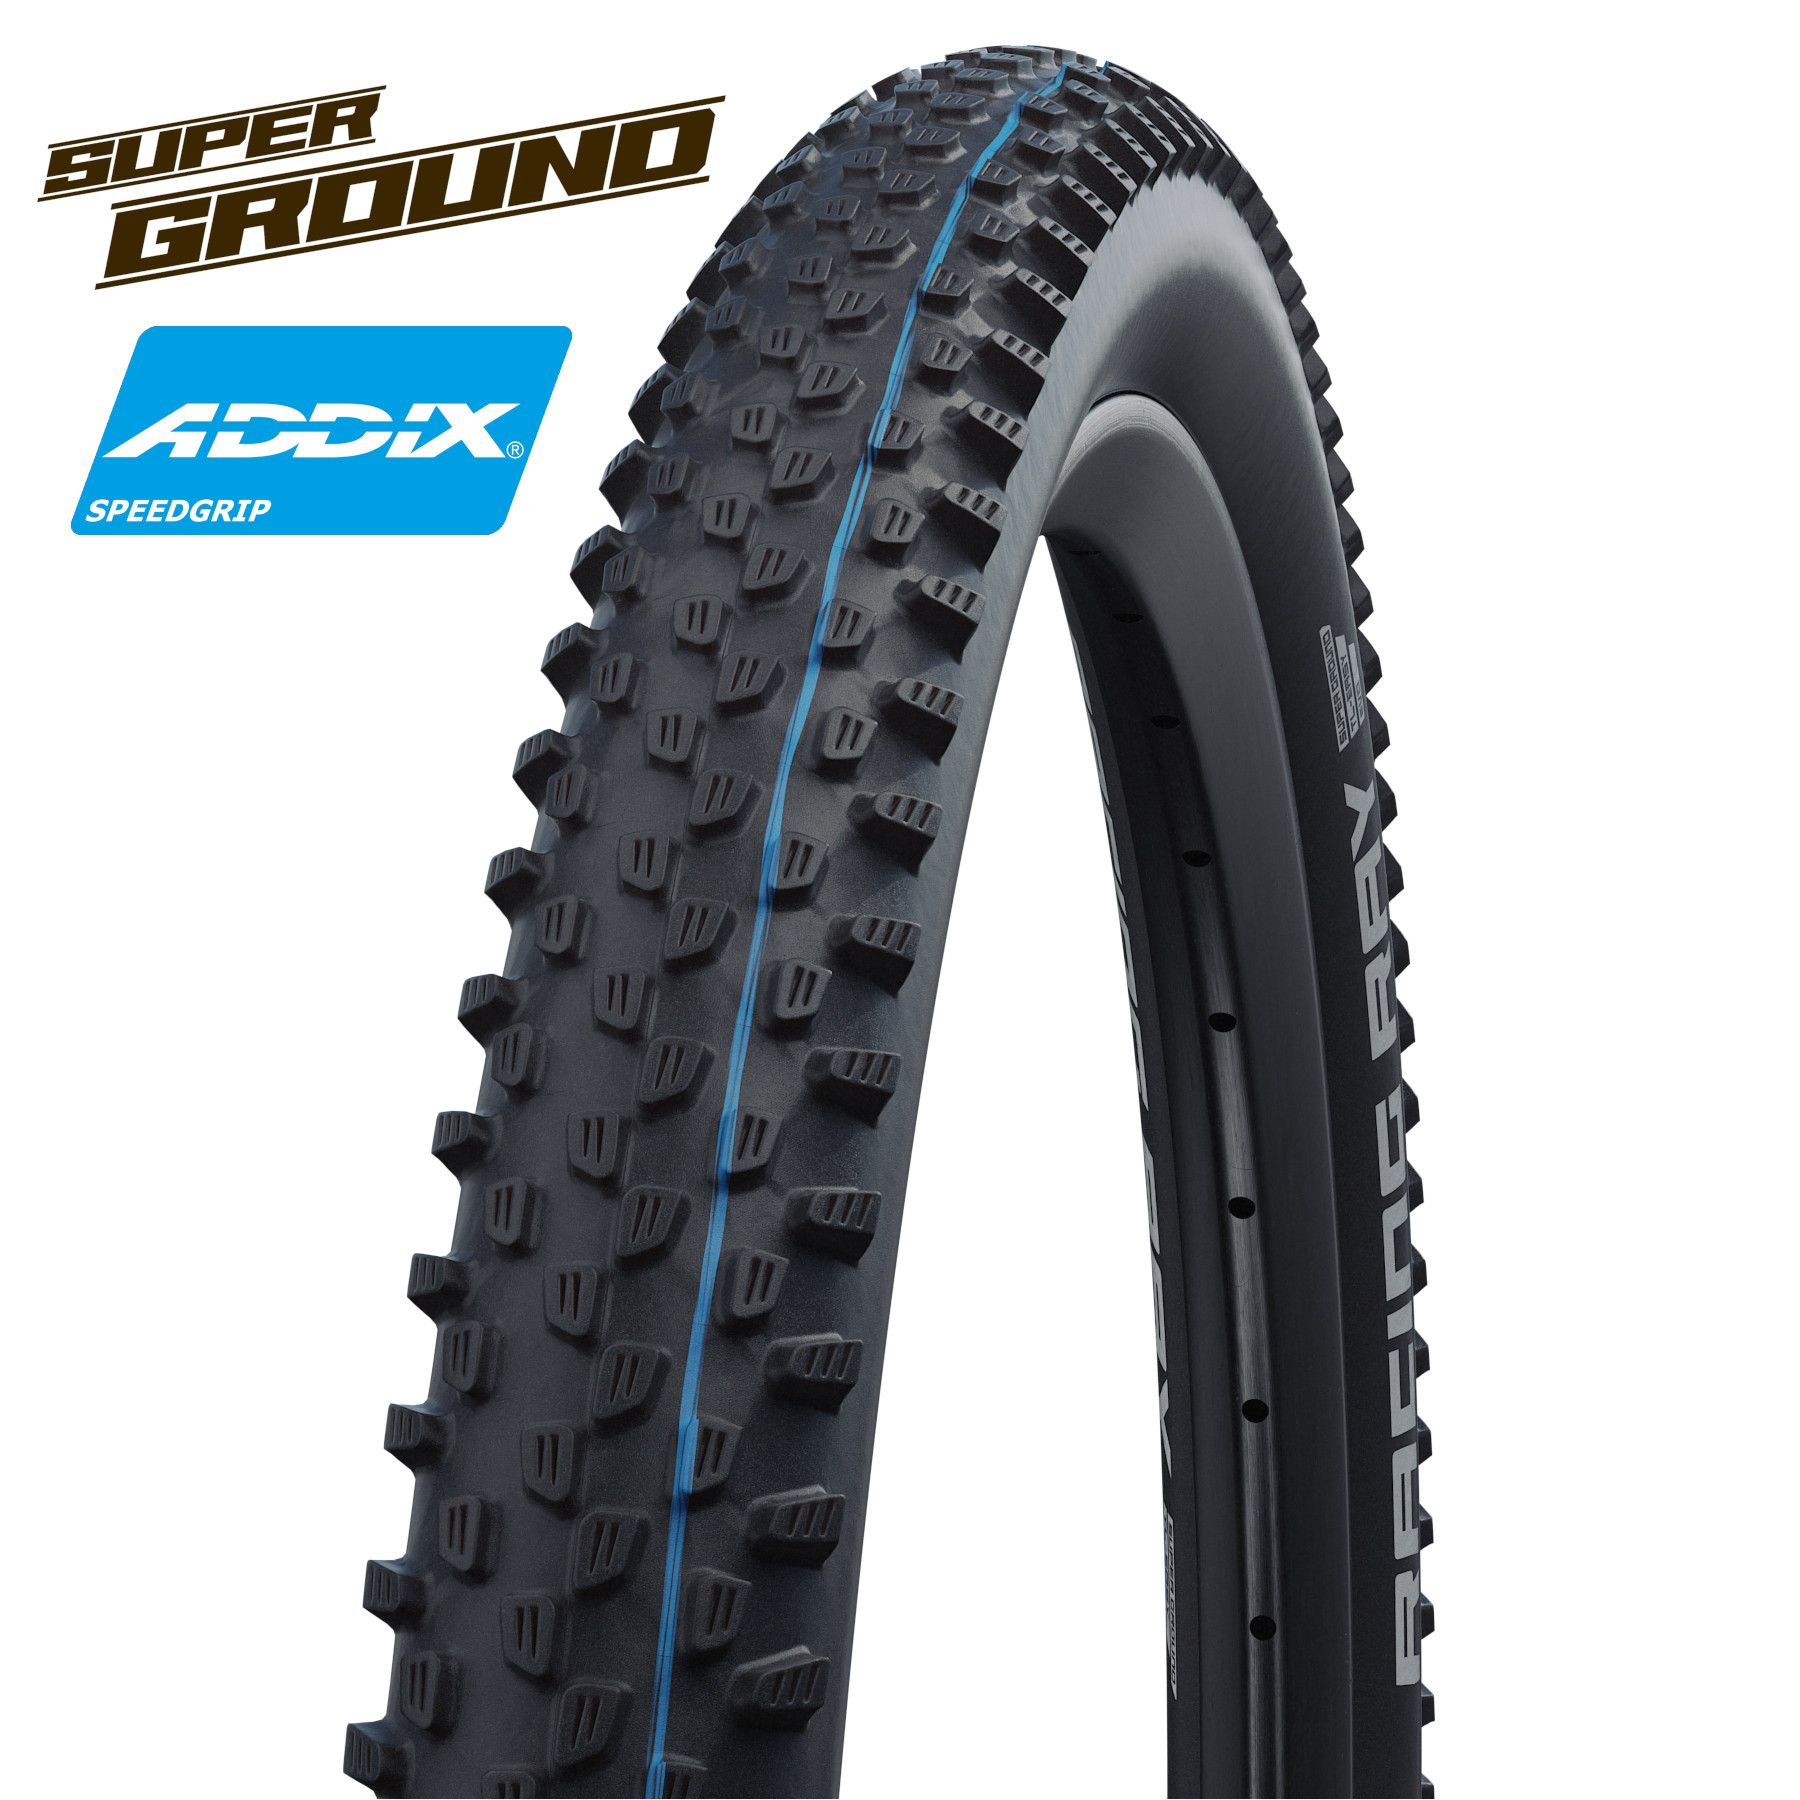 Picture of Schwalbe Racing Ray Evolution MTB Folding Tire - AddixSpeedGrip - SuperGround - TLEasy - E-25 - 27.5x2.25 Inches